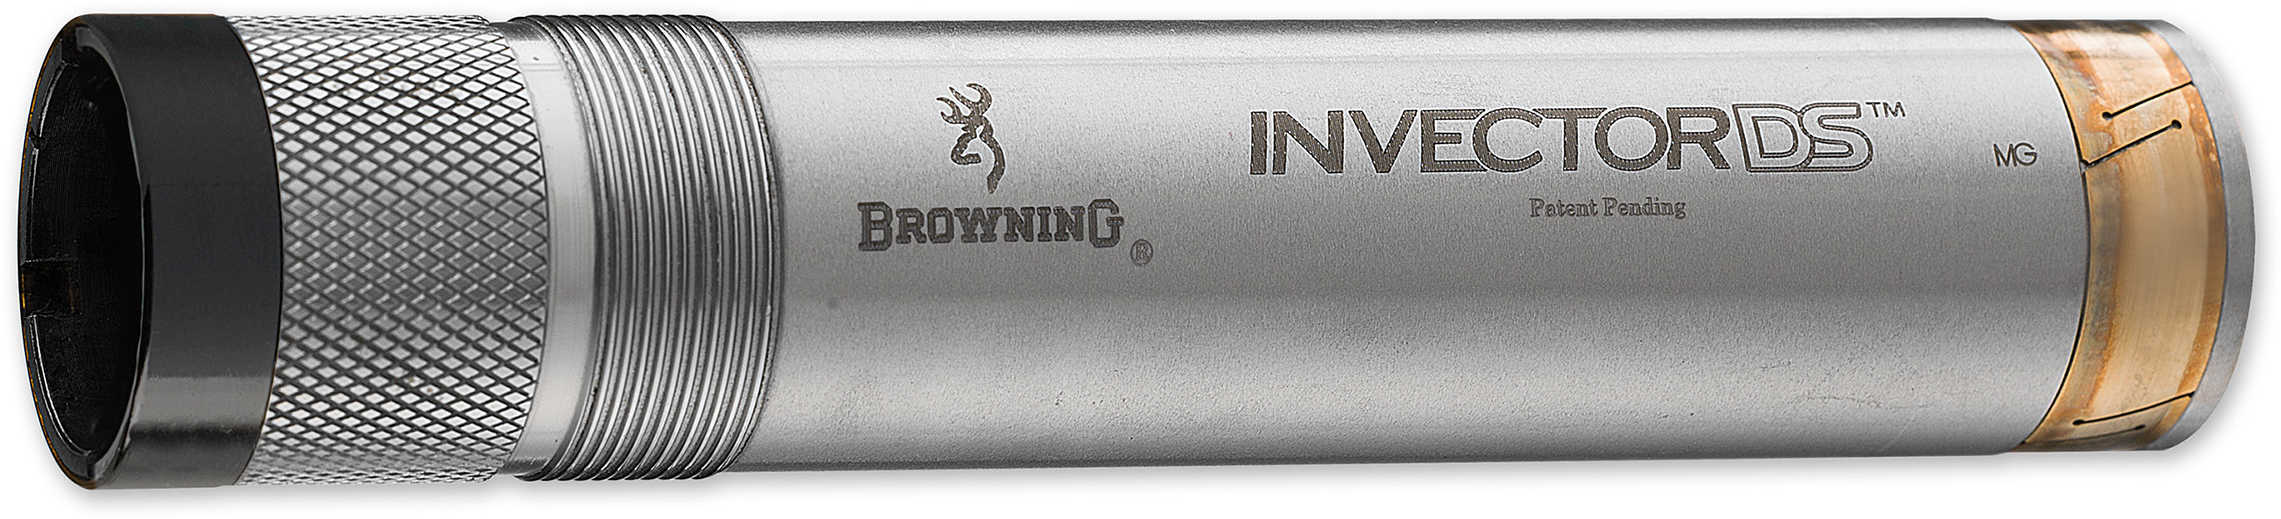 Browning Invector -DS Turkey Choke, 12 Gauge X-Full, Extended